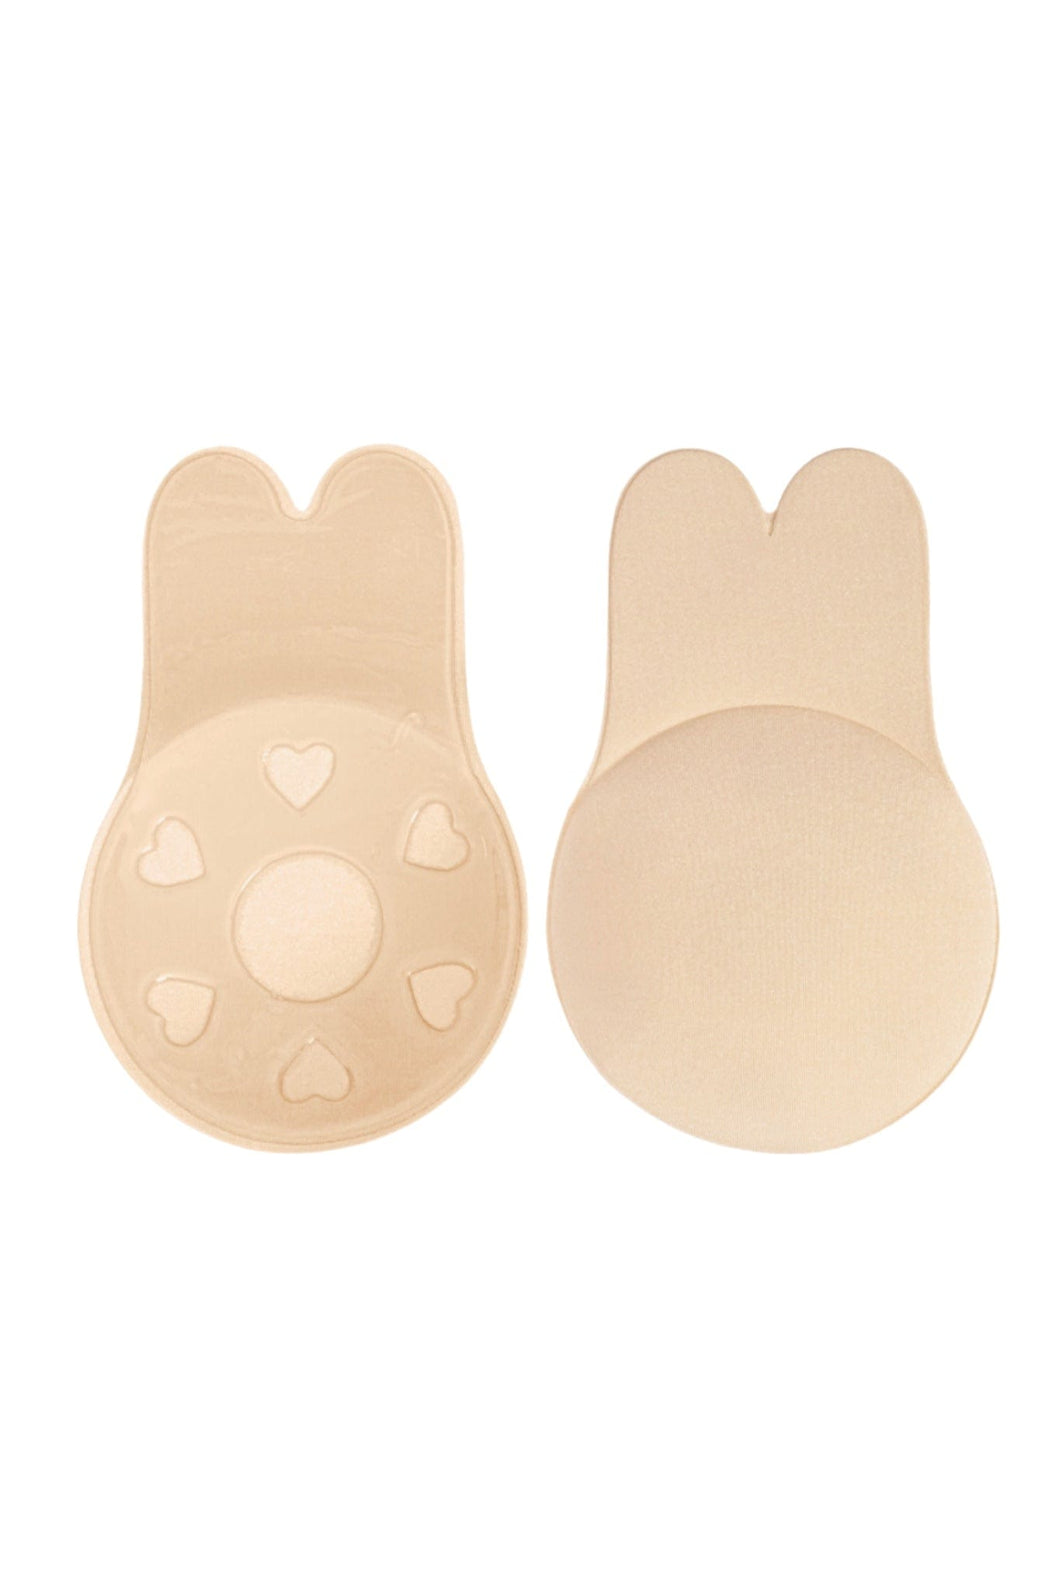 Anaphe Lift & Shape Bunny Stick On Bra - Perfect for Halters & Backless Designs